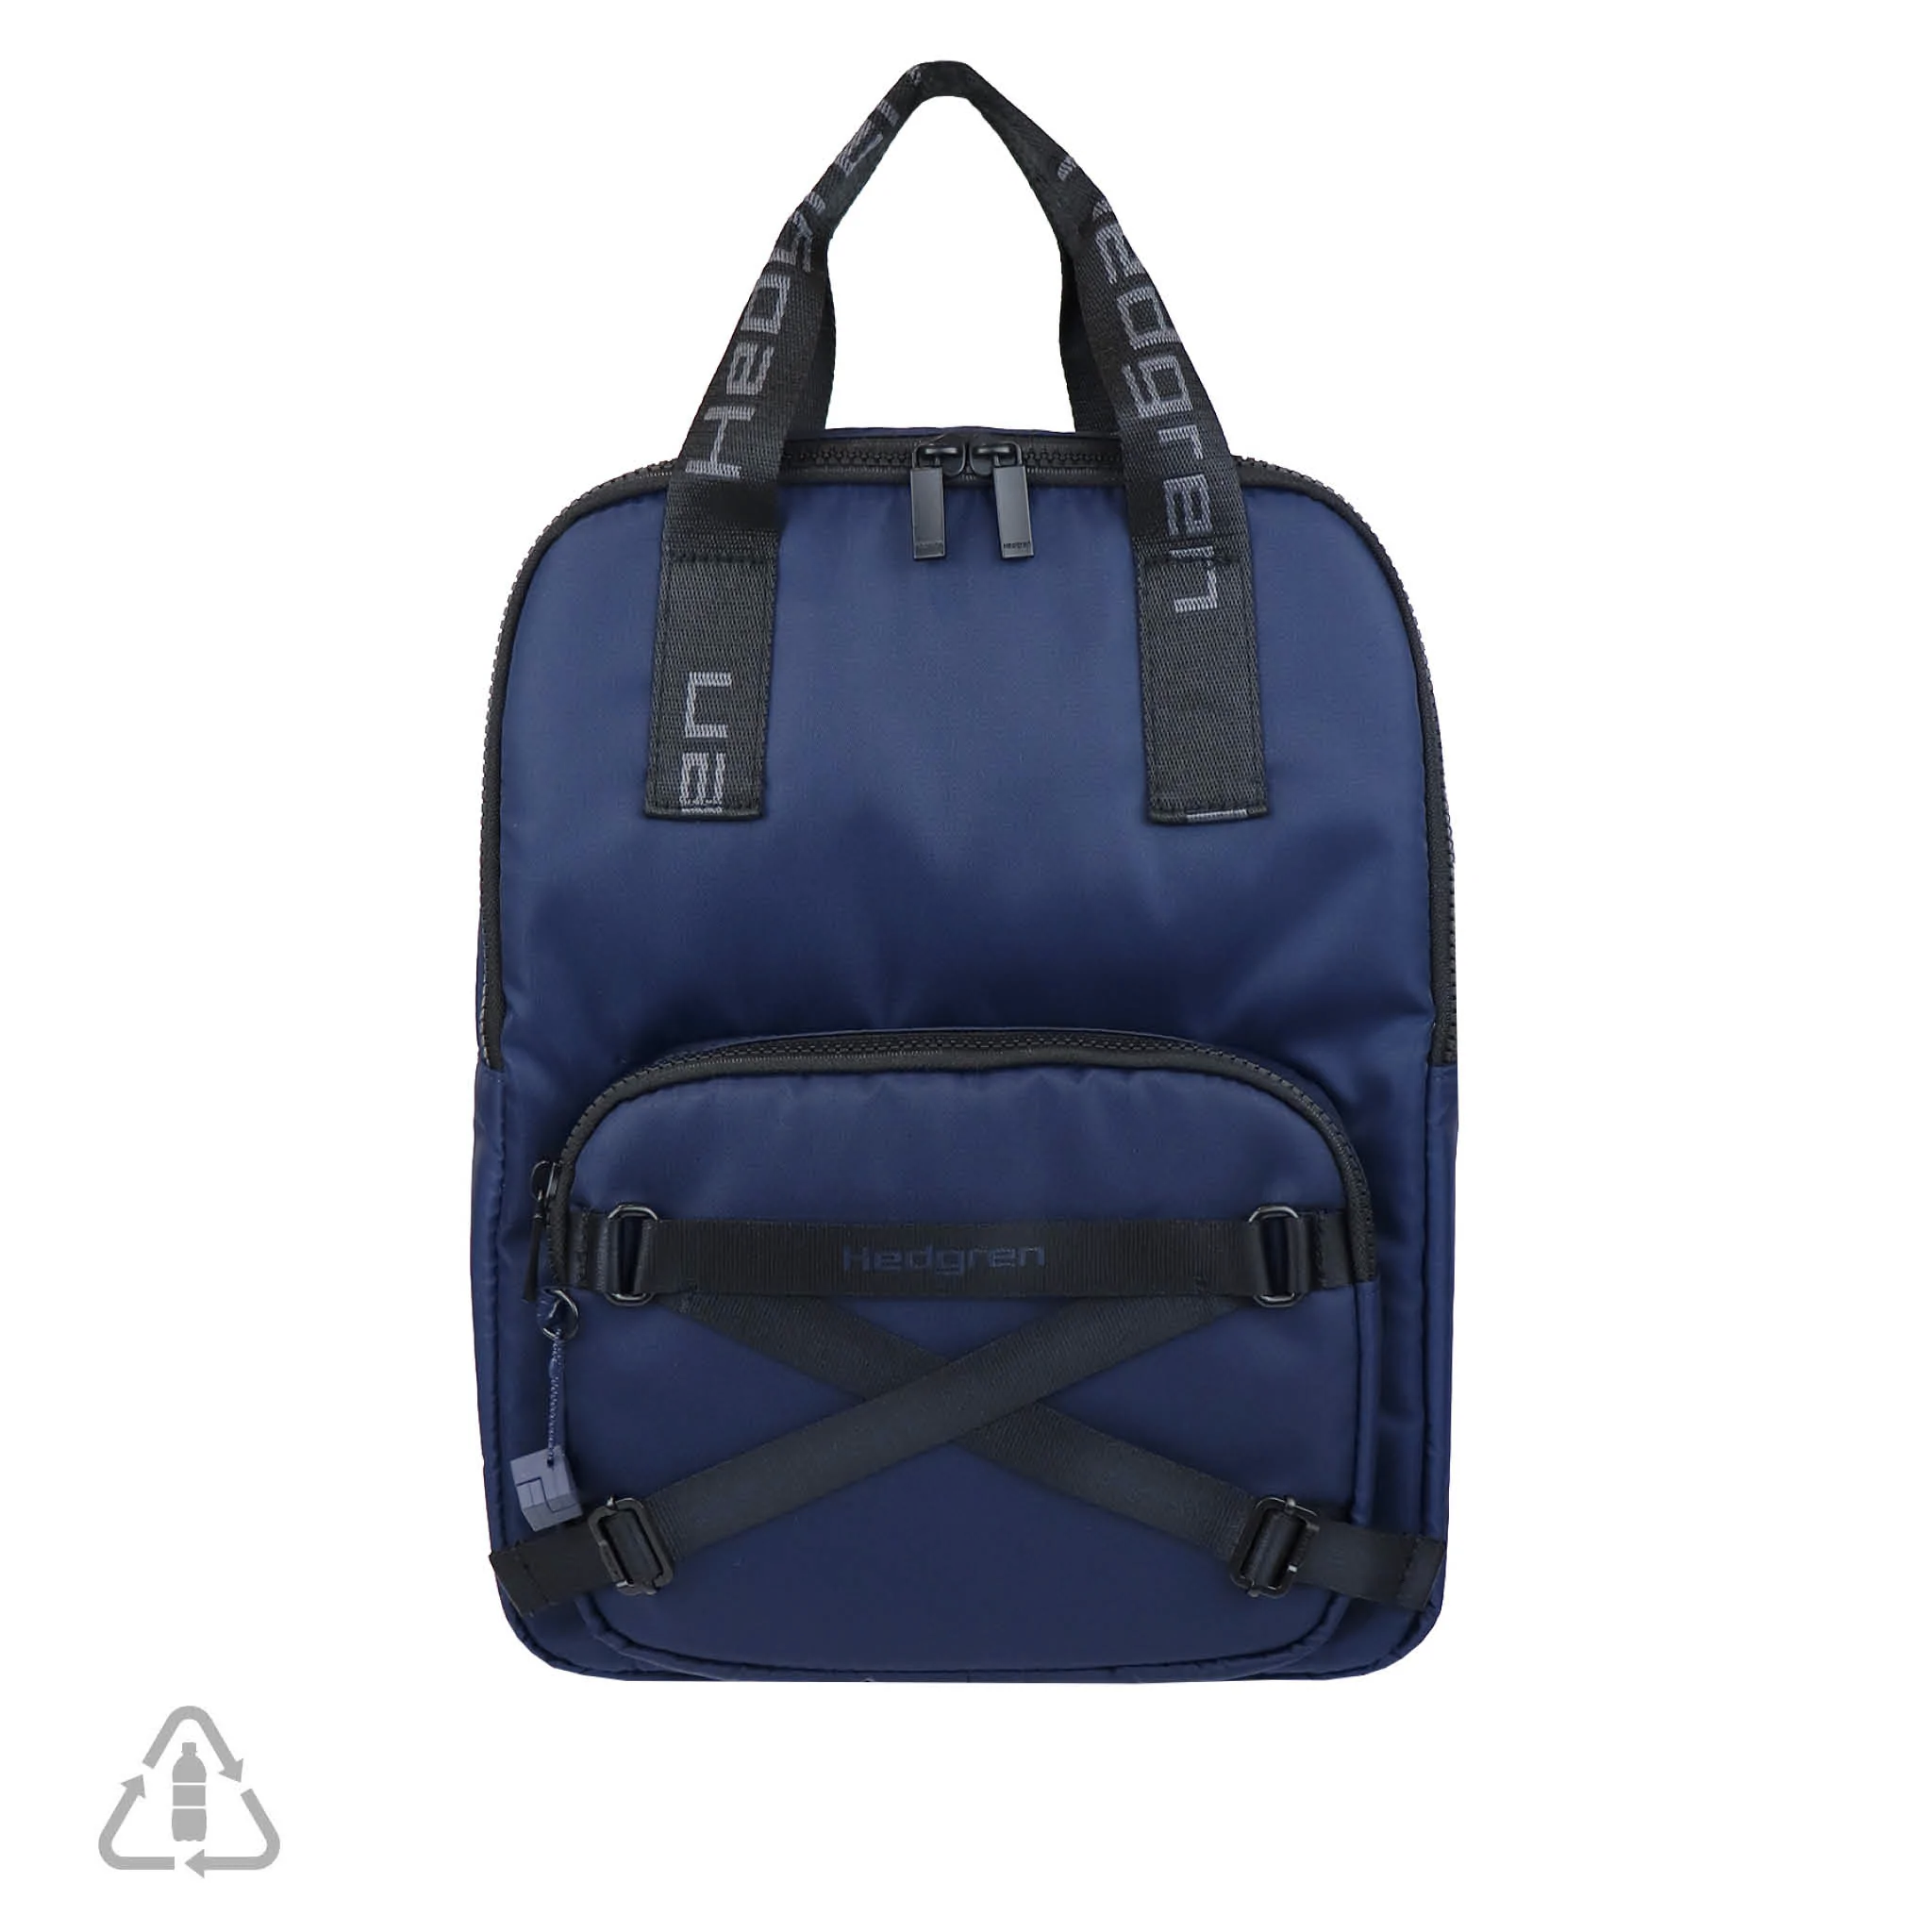 Sierra Sustainably Made Backpack